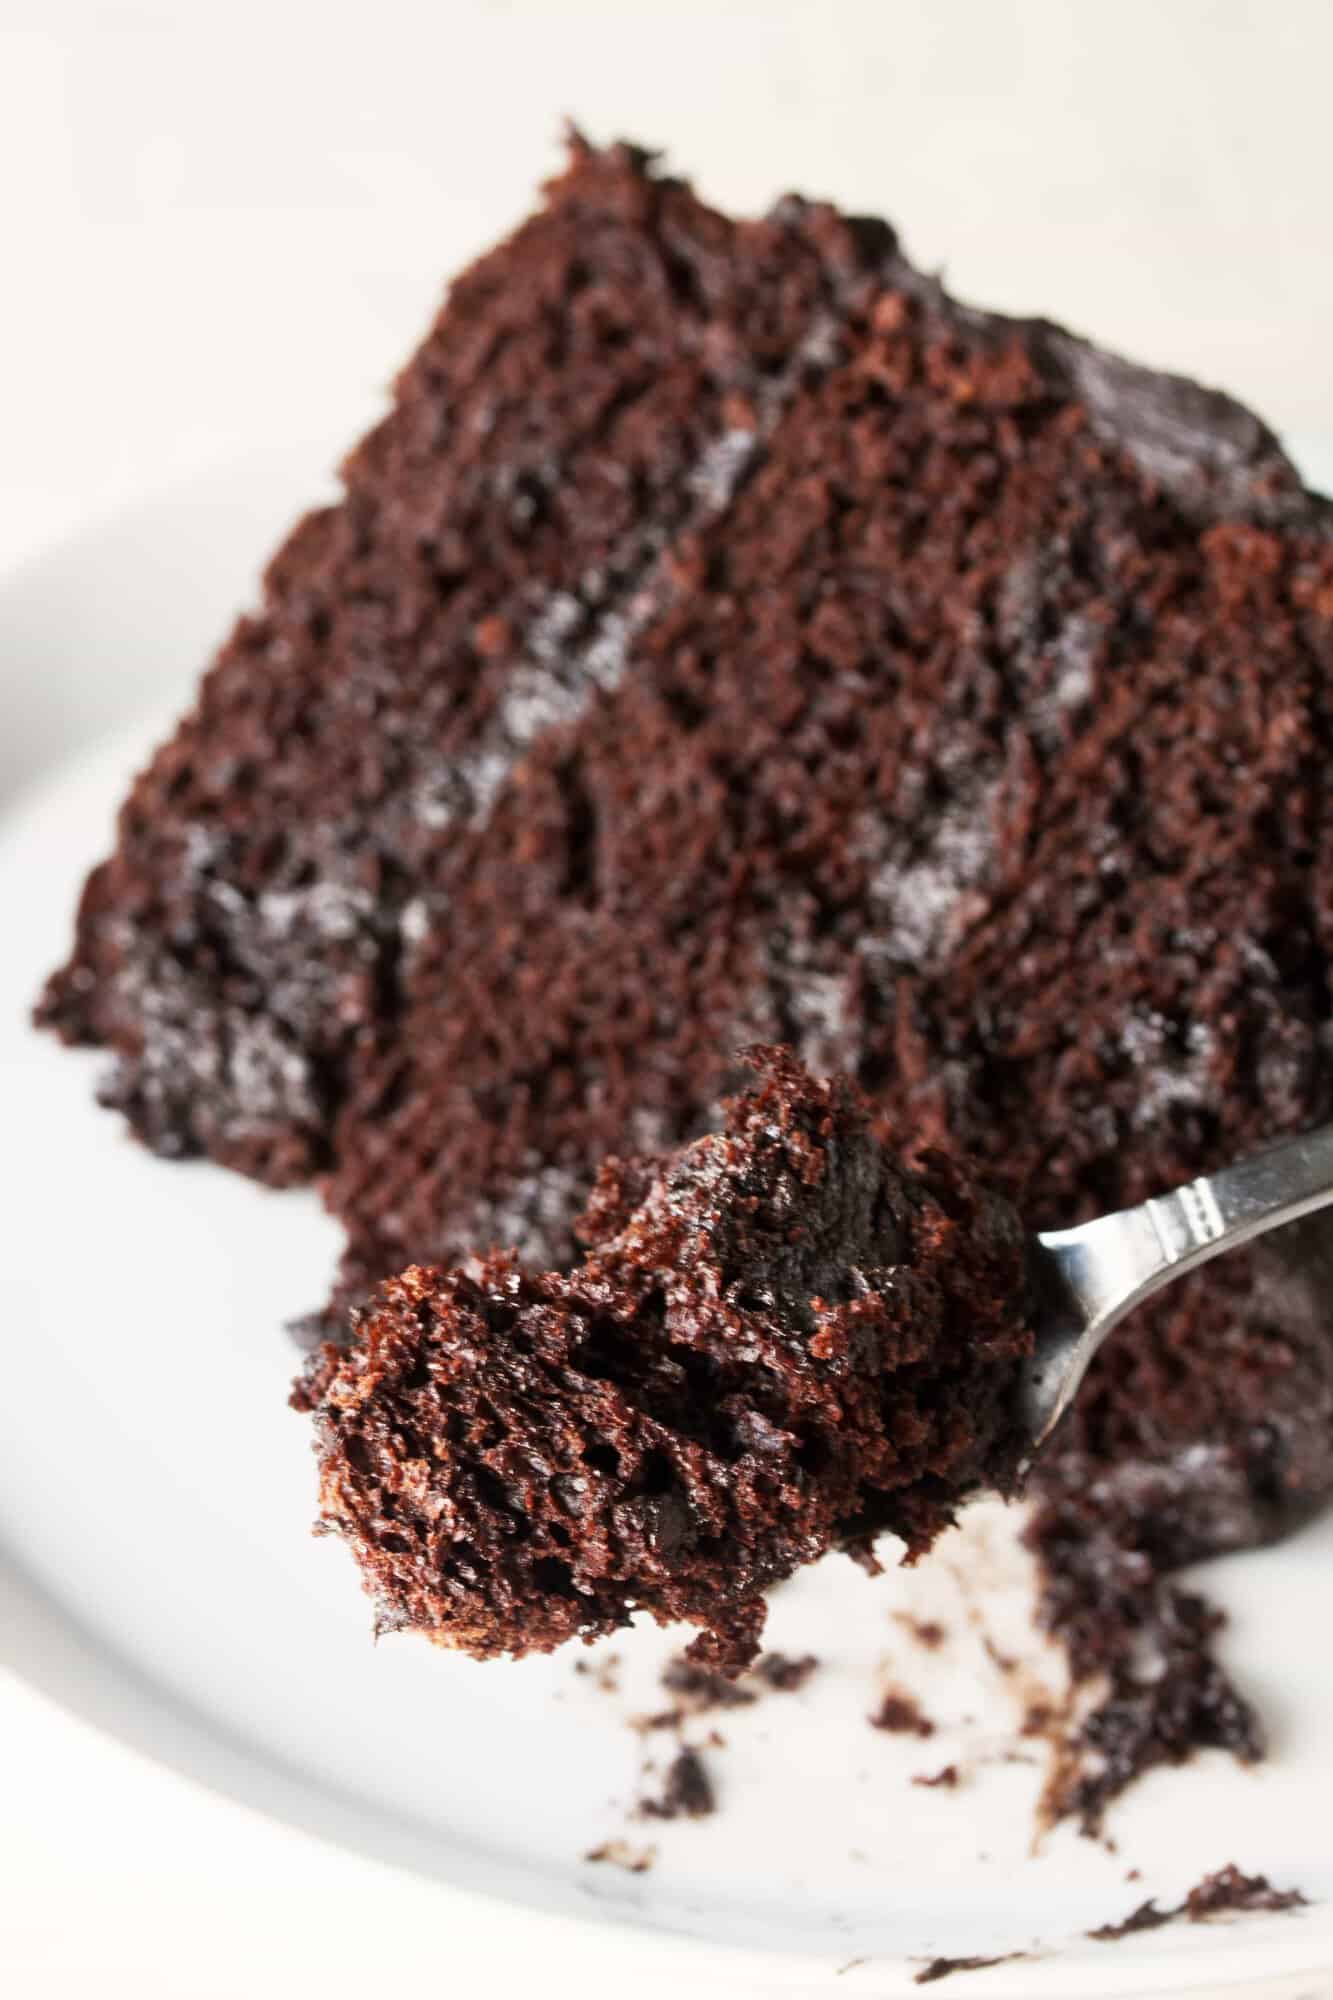 The Most Amazing Chocolate Cake is here. I call this my Matilda Cake because I swear it's just as good as the cake that Bruce Bogtrotter ate in Matilda. Moist, chocolaty perfection. This is the chocolate cake you've been dreaming of!